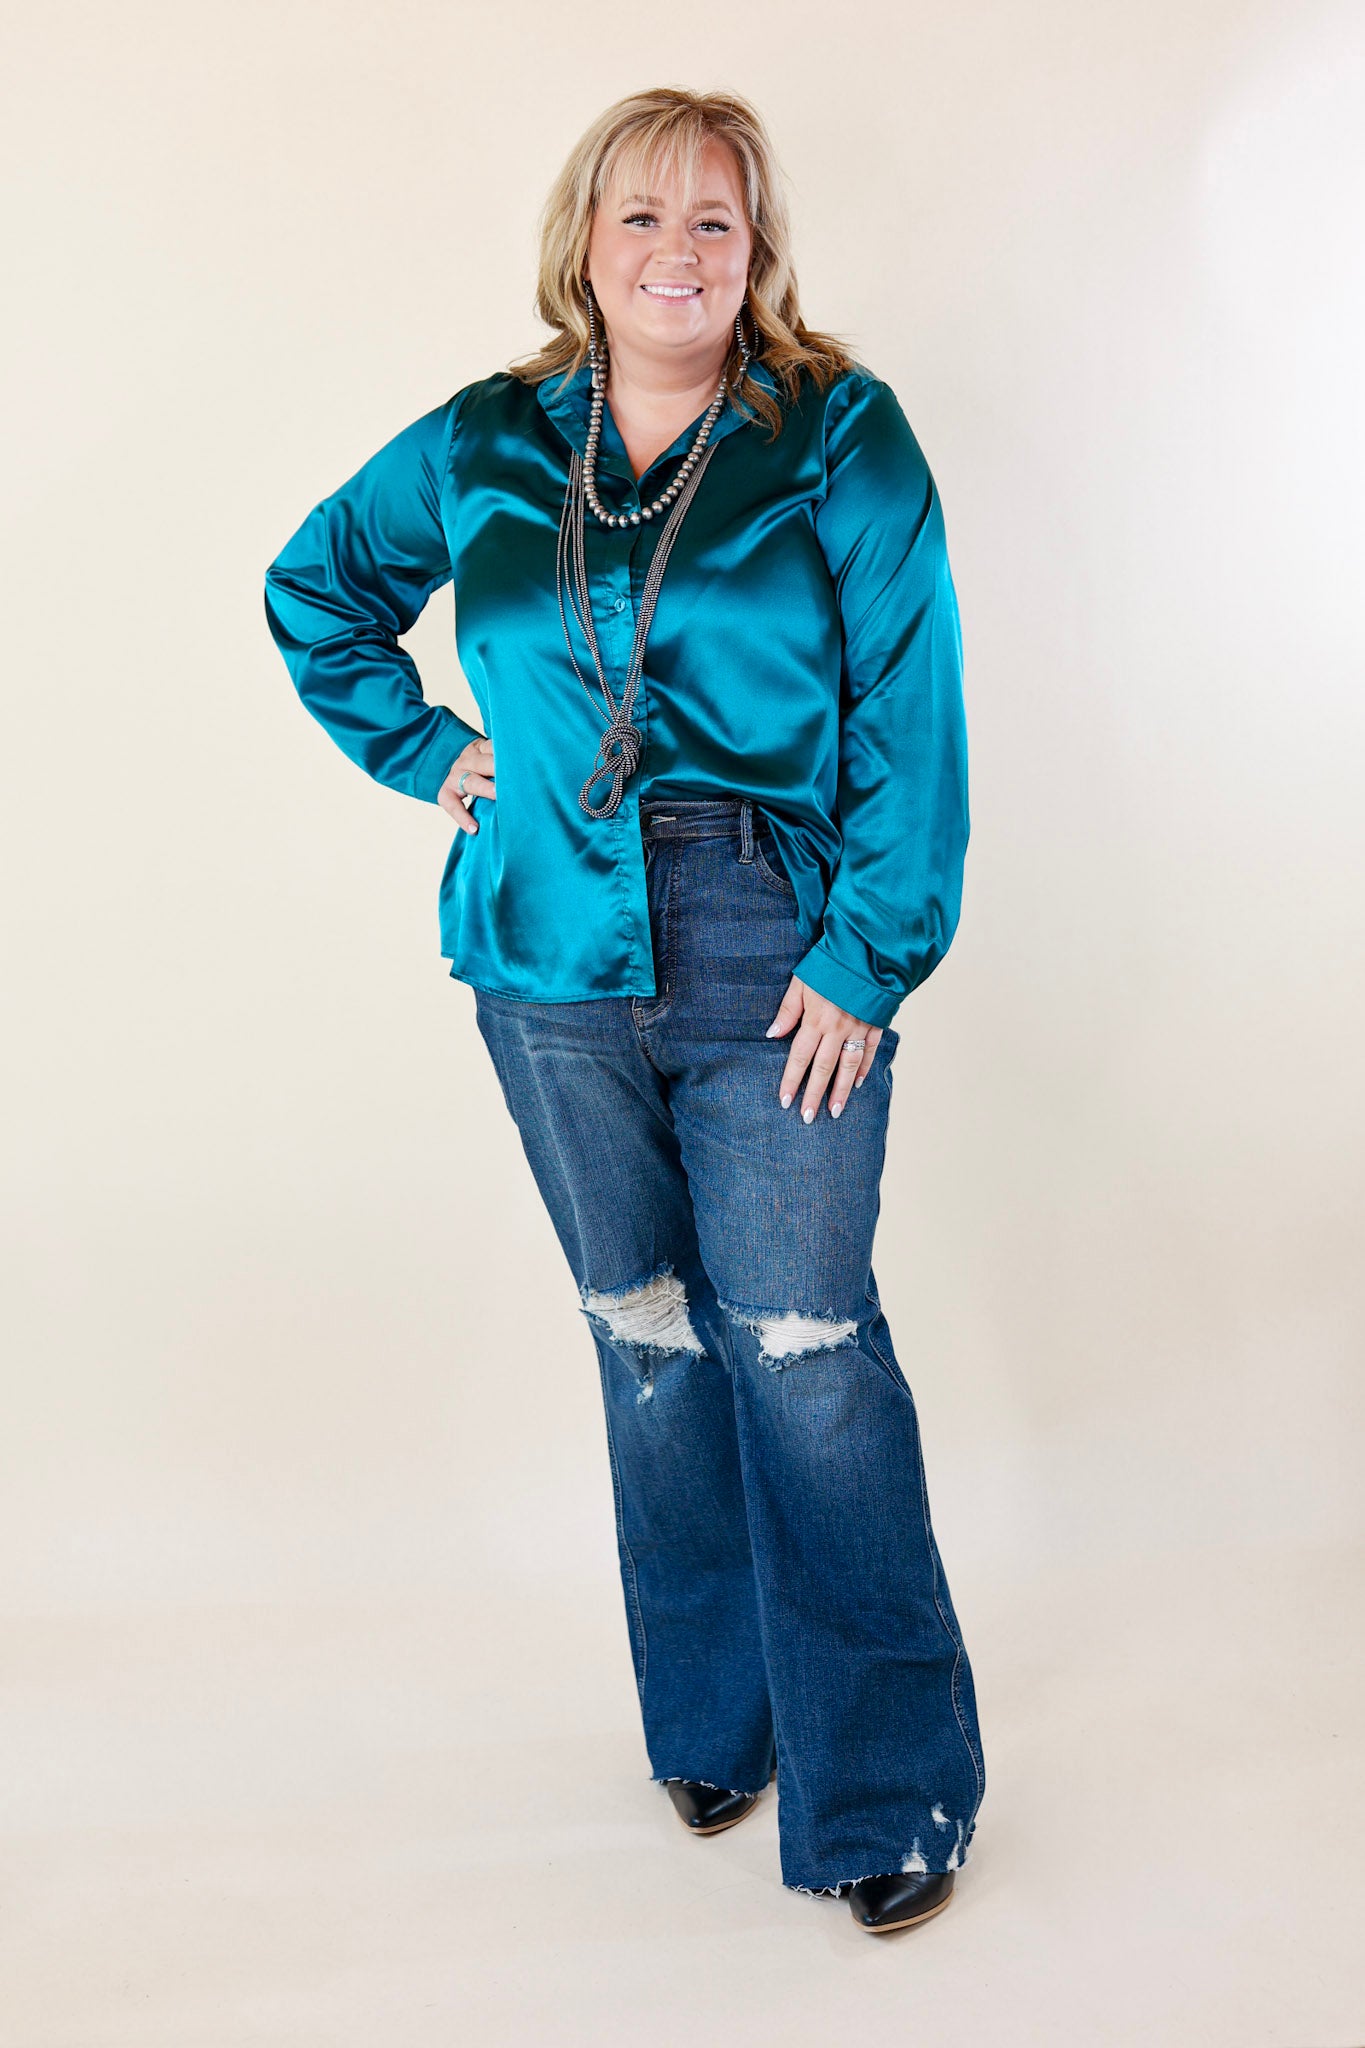 Down To Disco Satin Long Sleeve Button Up Top in Teal Blue